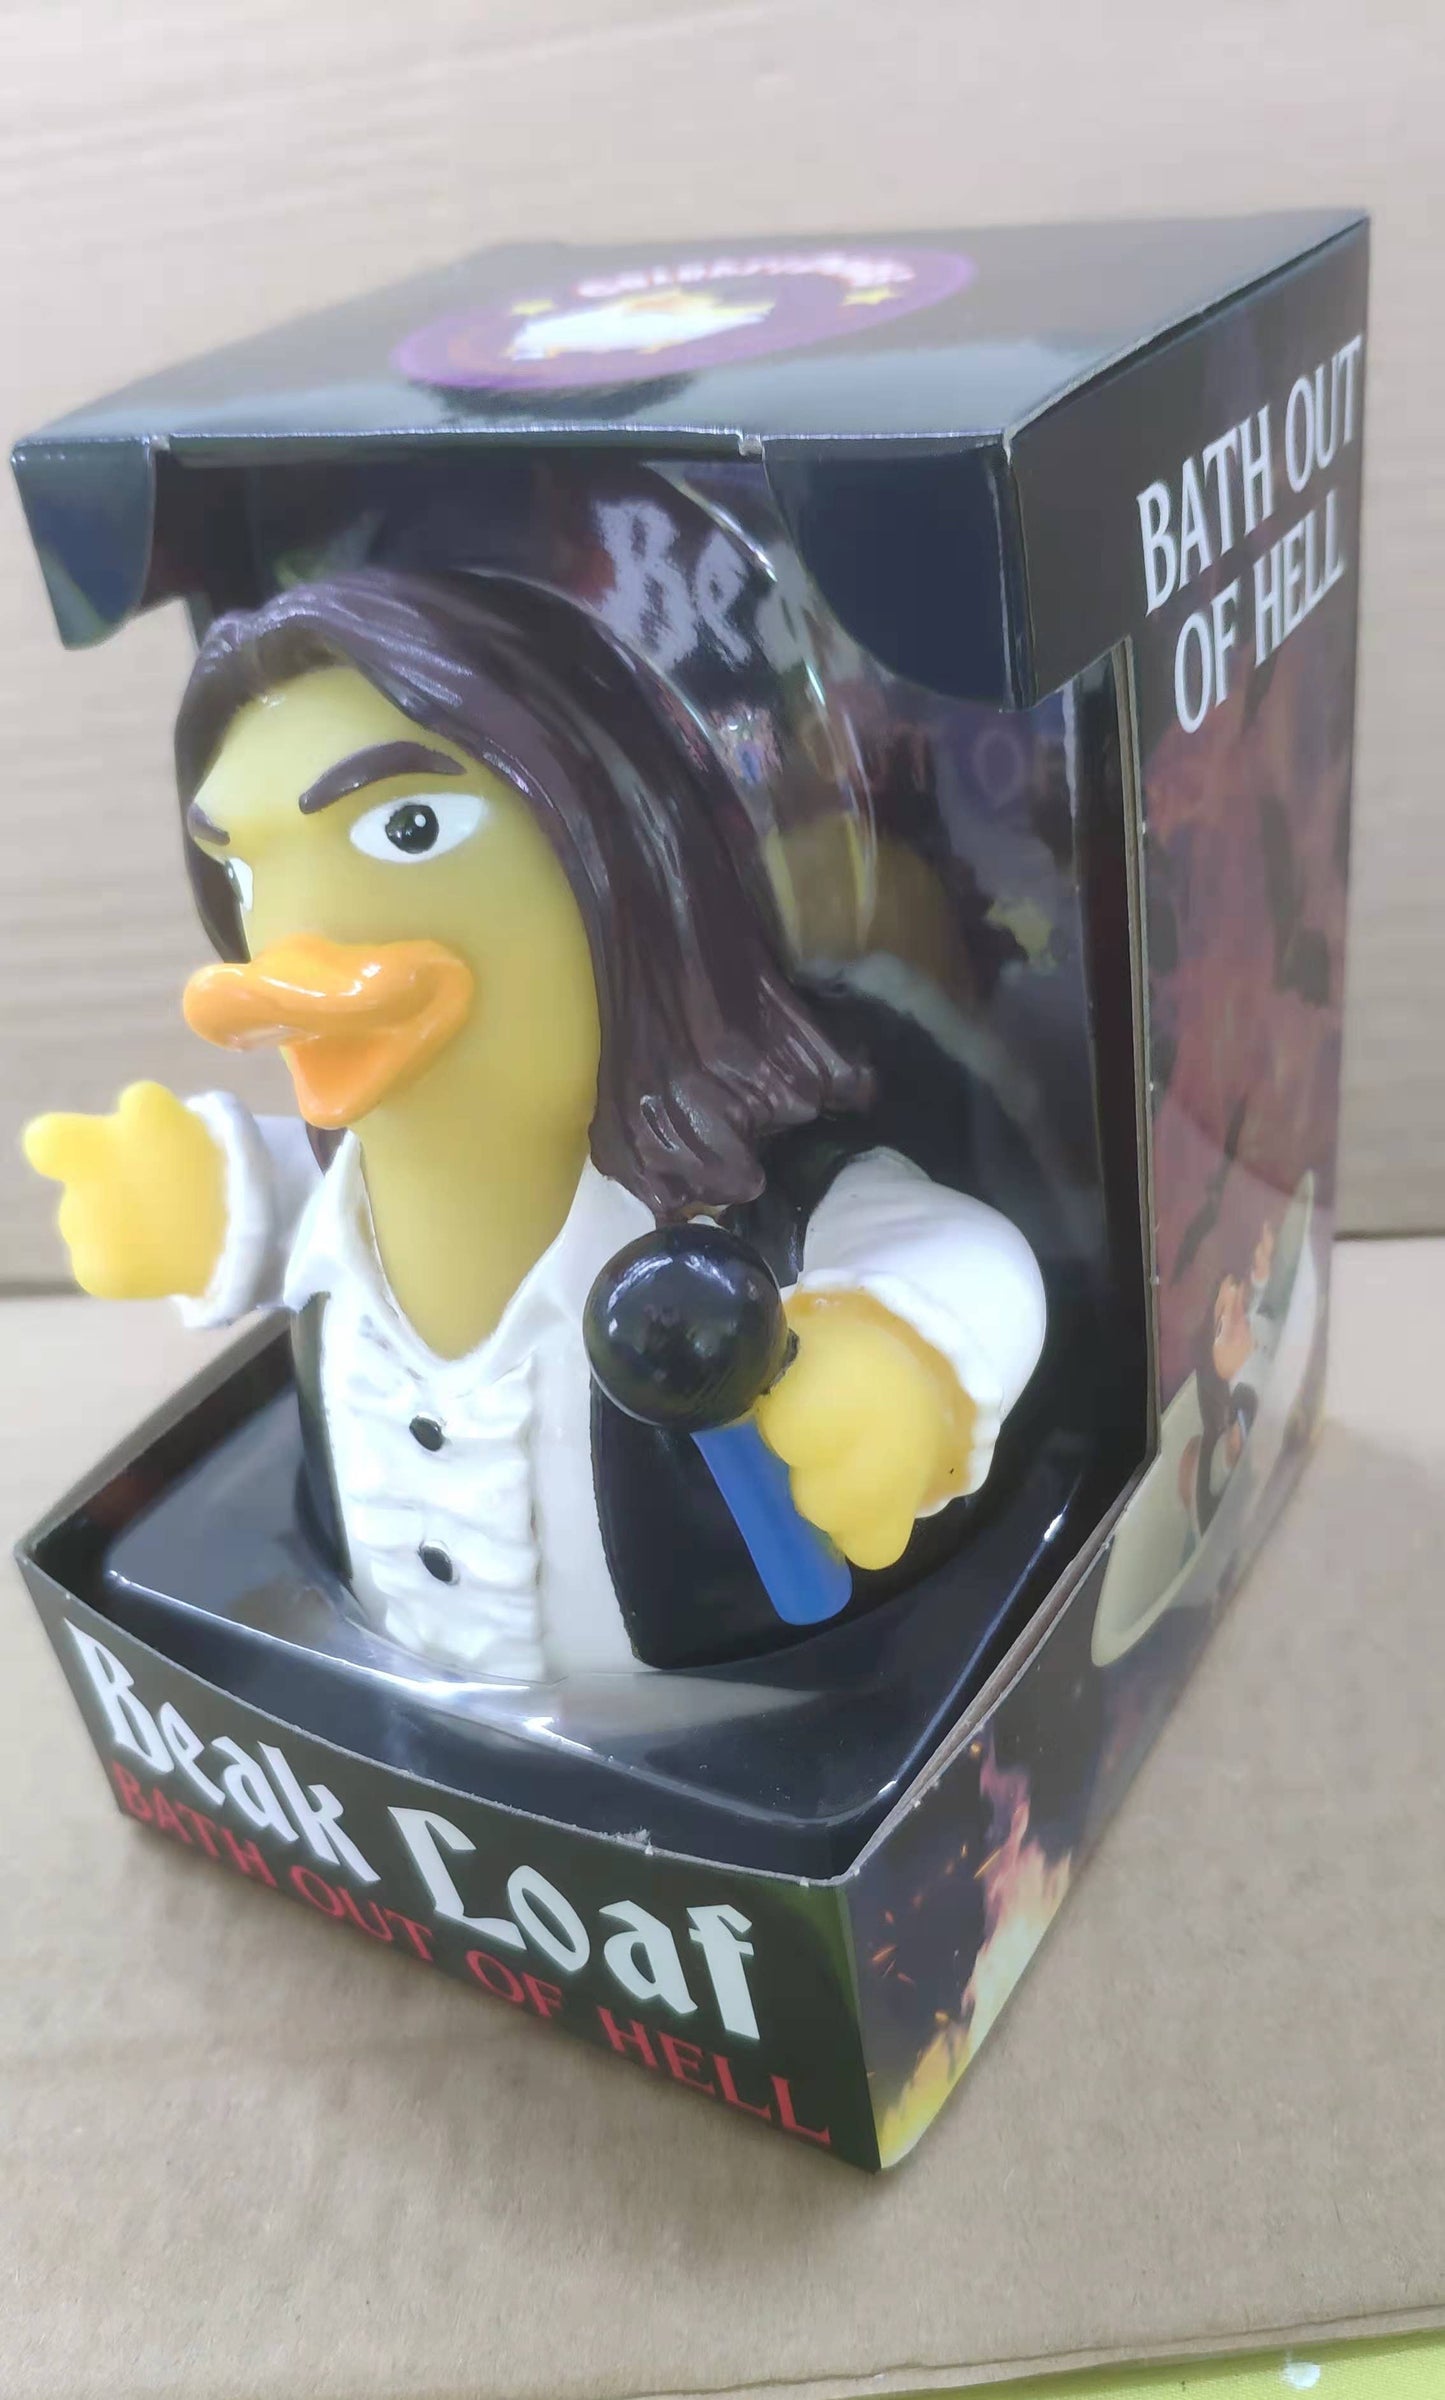 Beak Loaf - Bath Out of Hell Meatloaf Parody Rubber Duck